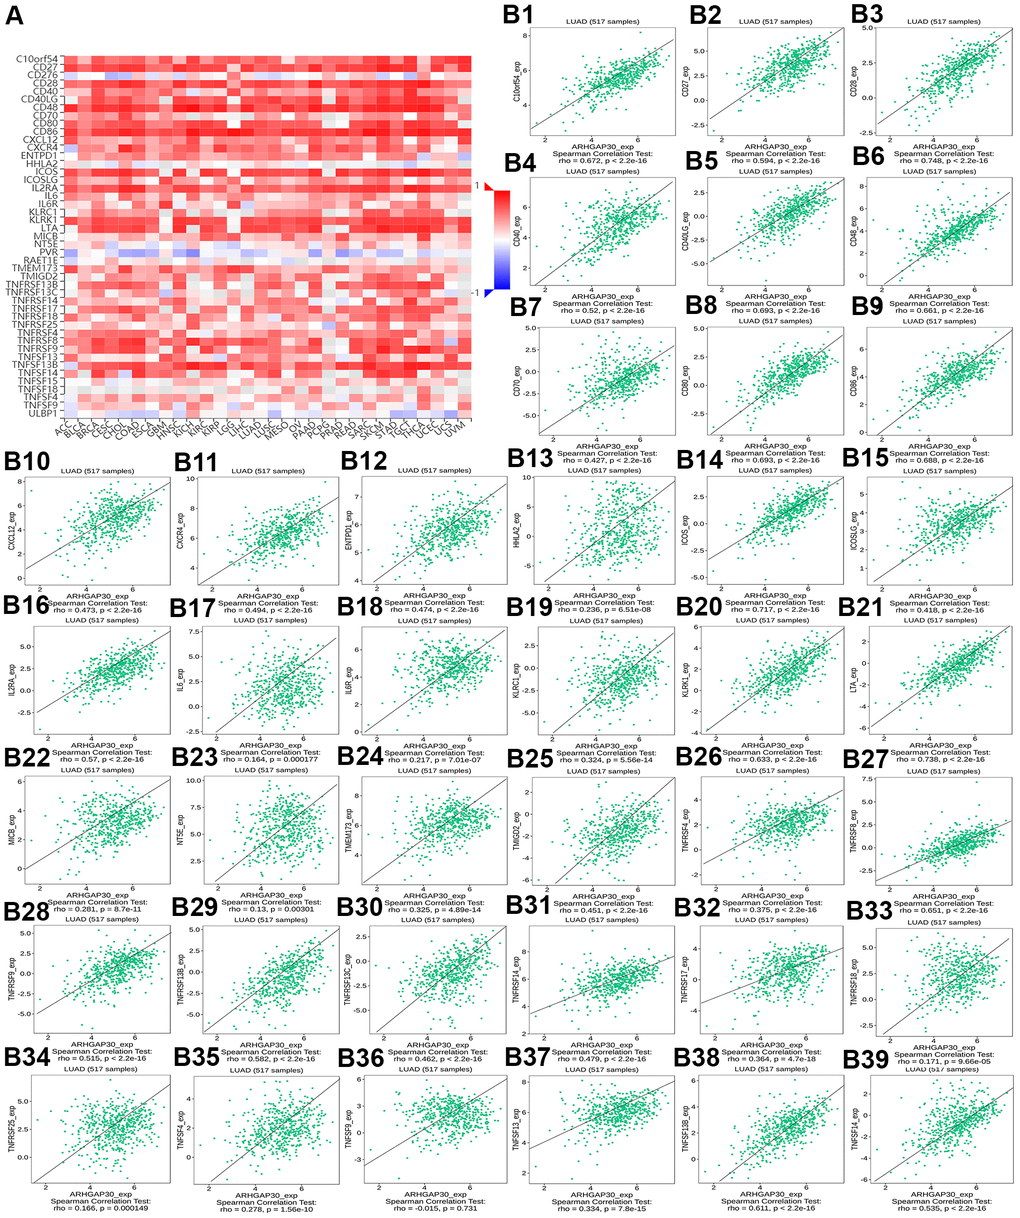 The correlation between the abundance of tumor-infiltrating lymphocytes (TILs) and the methylation of ARHGAP30. (A) Heat map of the relationship between the abundance of TILs abundance and ARHGAP30 DNA methylation. (B1–B39) Scatter plots showing the negative correlation between ARHGAP30 DNA methylation and TILs in the treatment of lung adenocarcinoma. Act